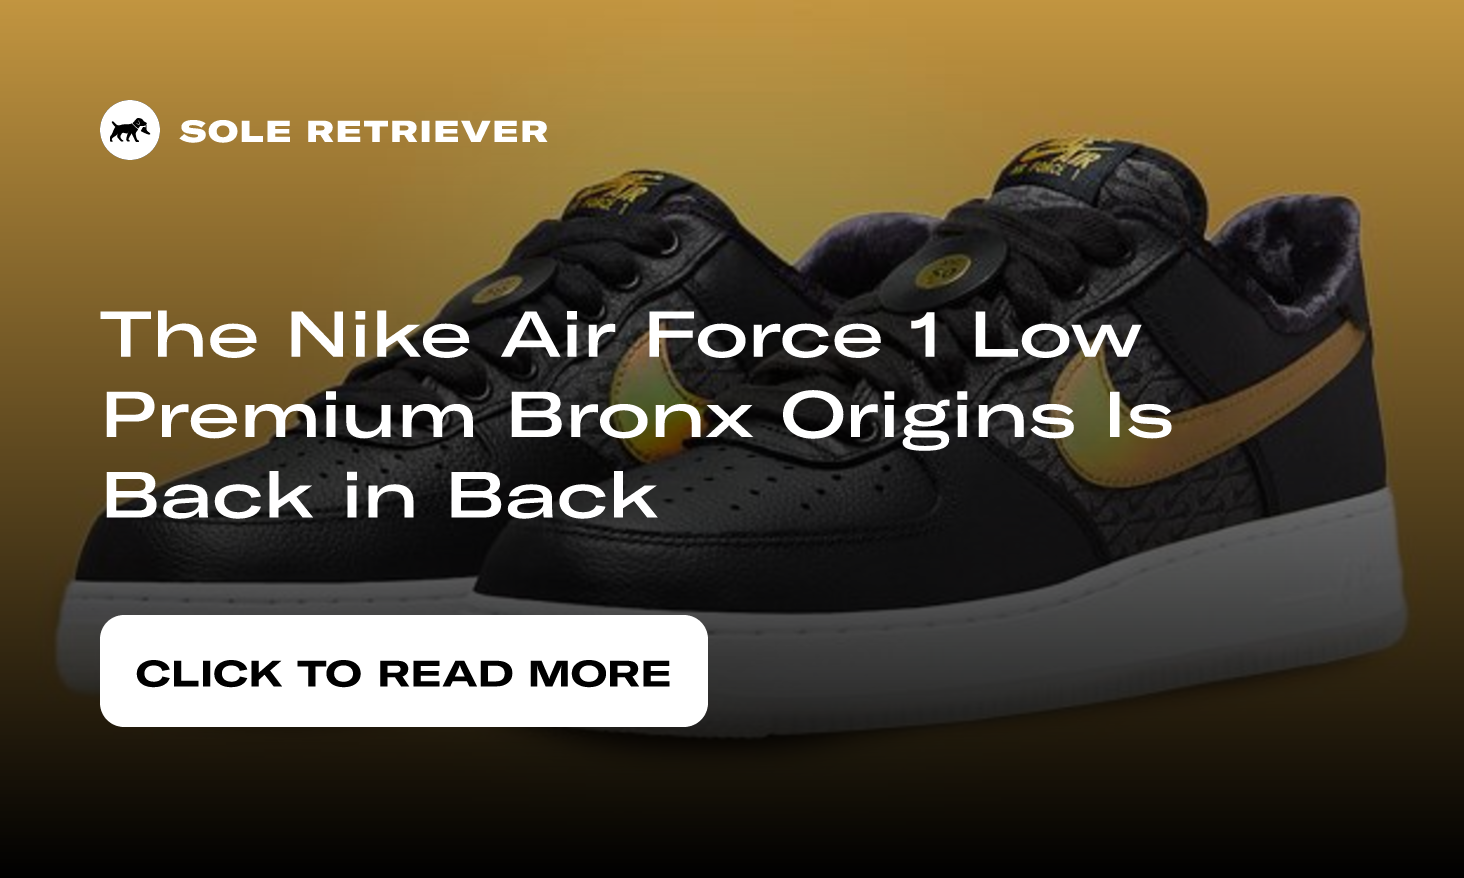 The Nike Air Force 1 Low Premium Bronx Origins Is Back in Back